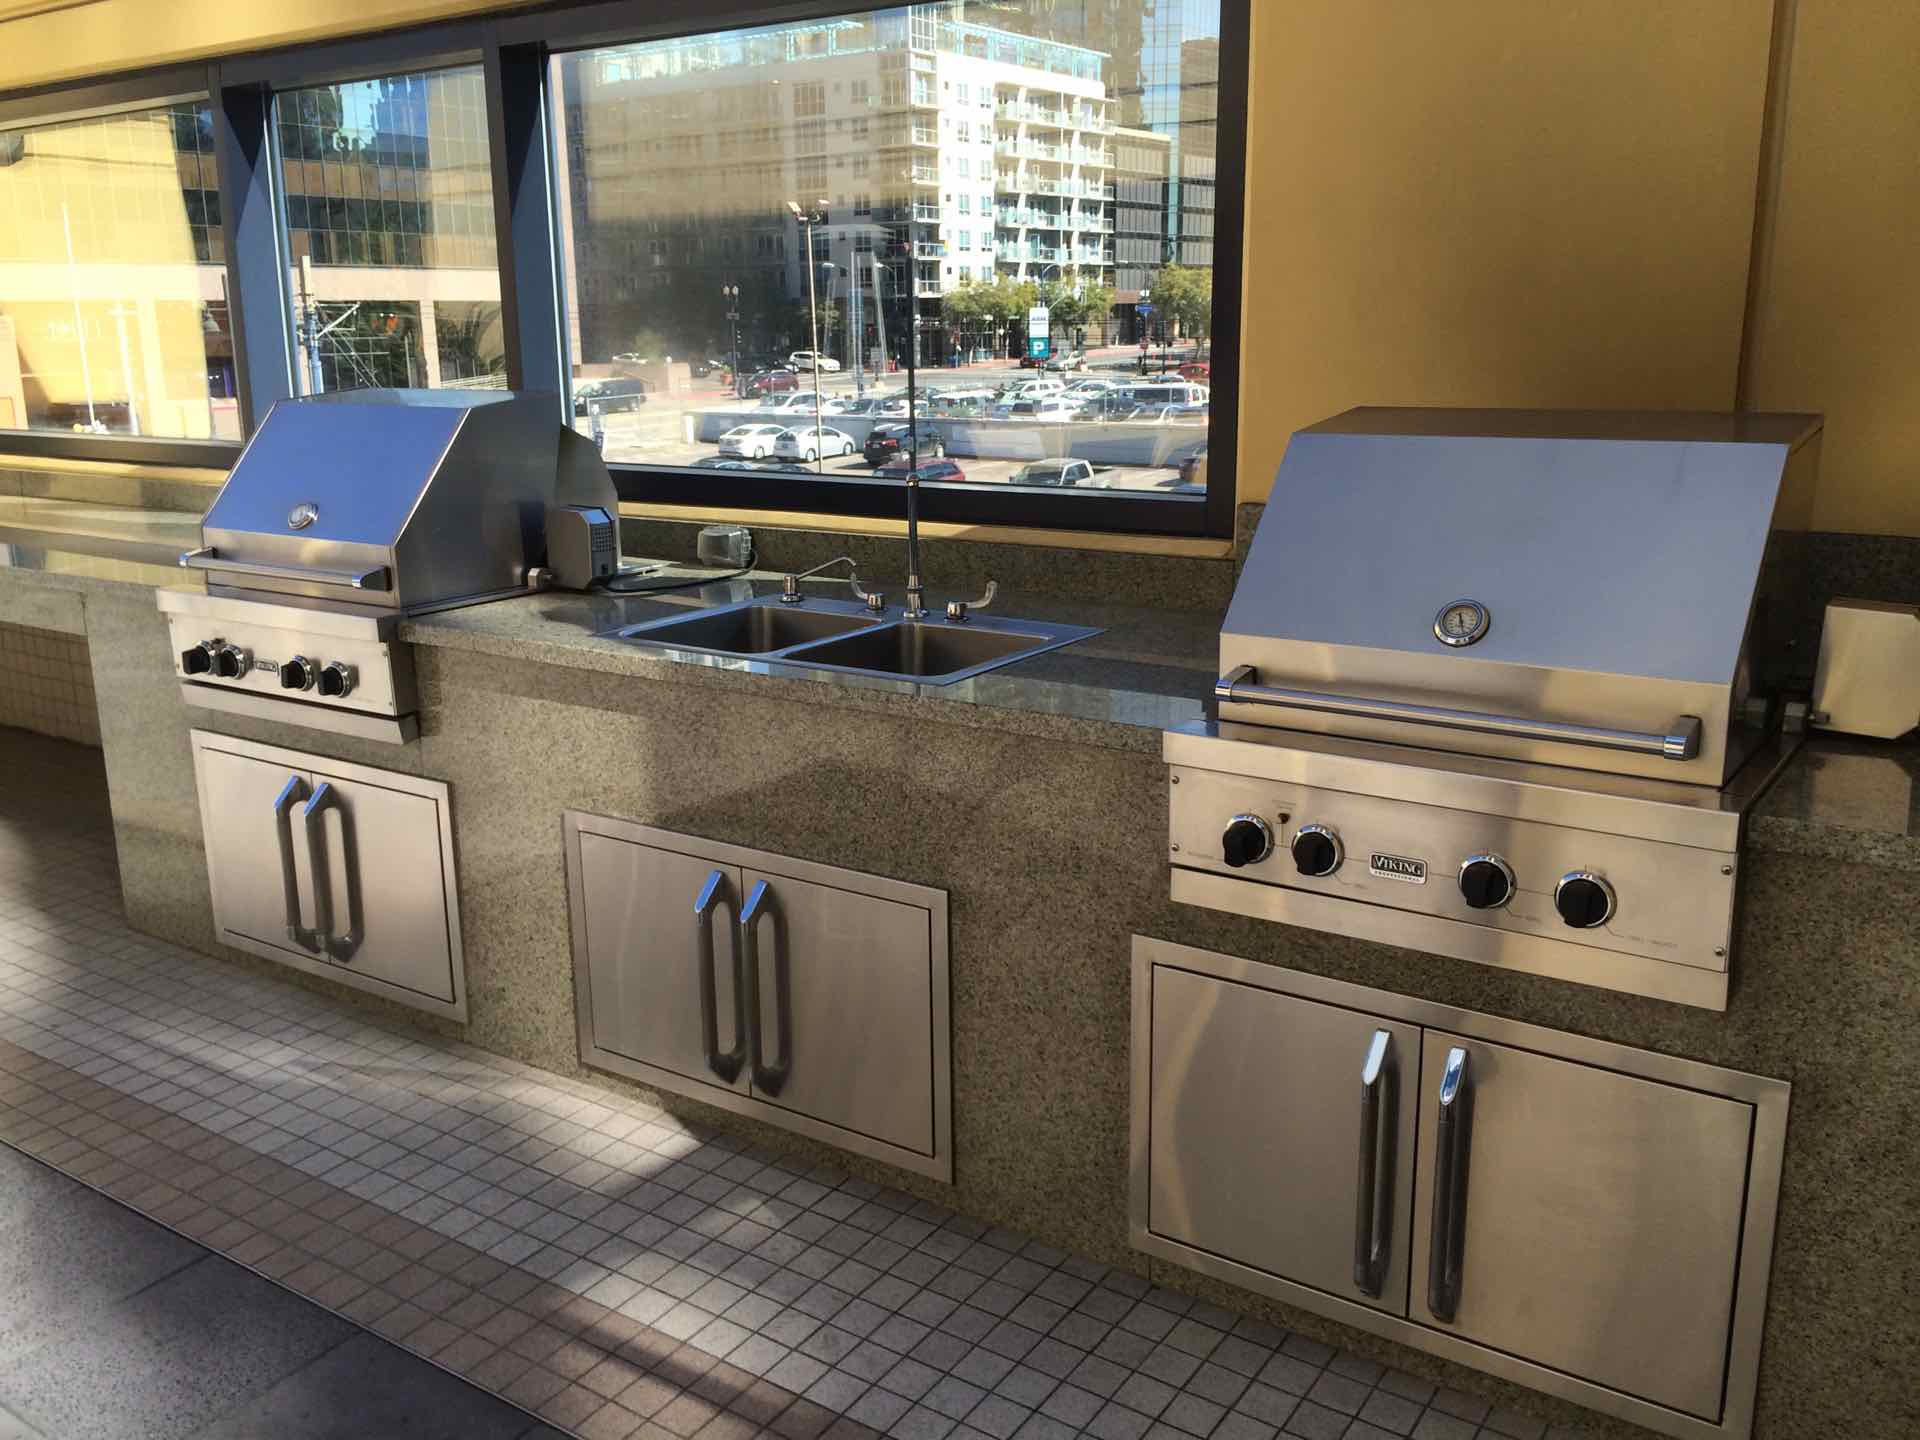 BBQ next to pool deck located on third floor of residential building